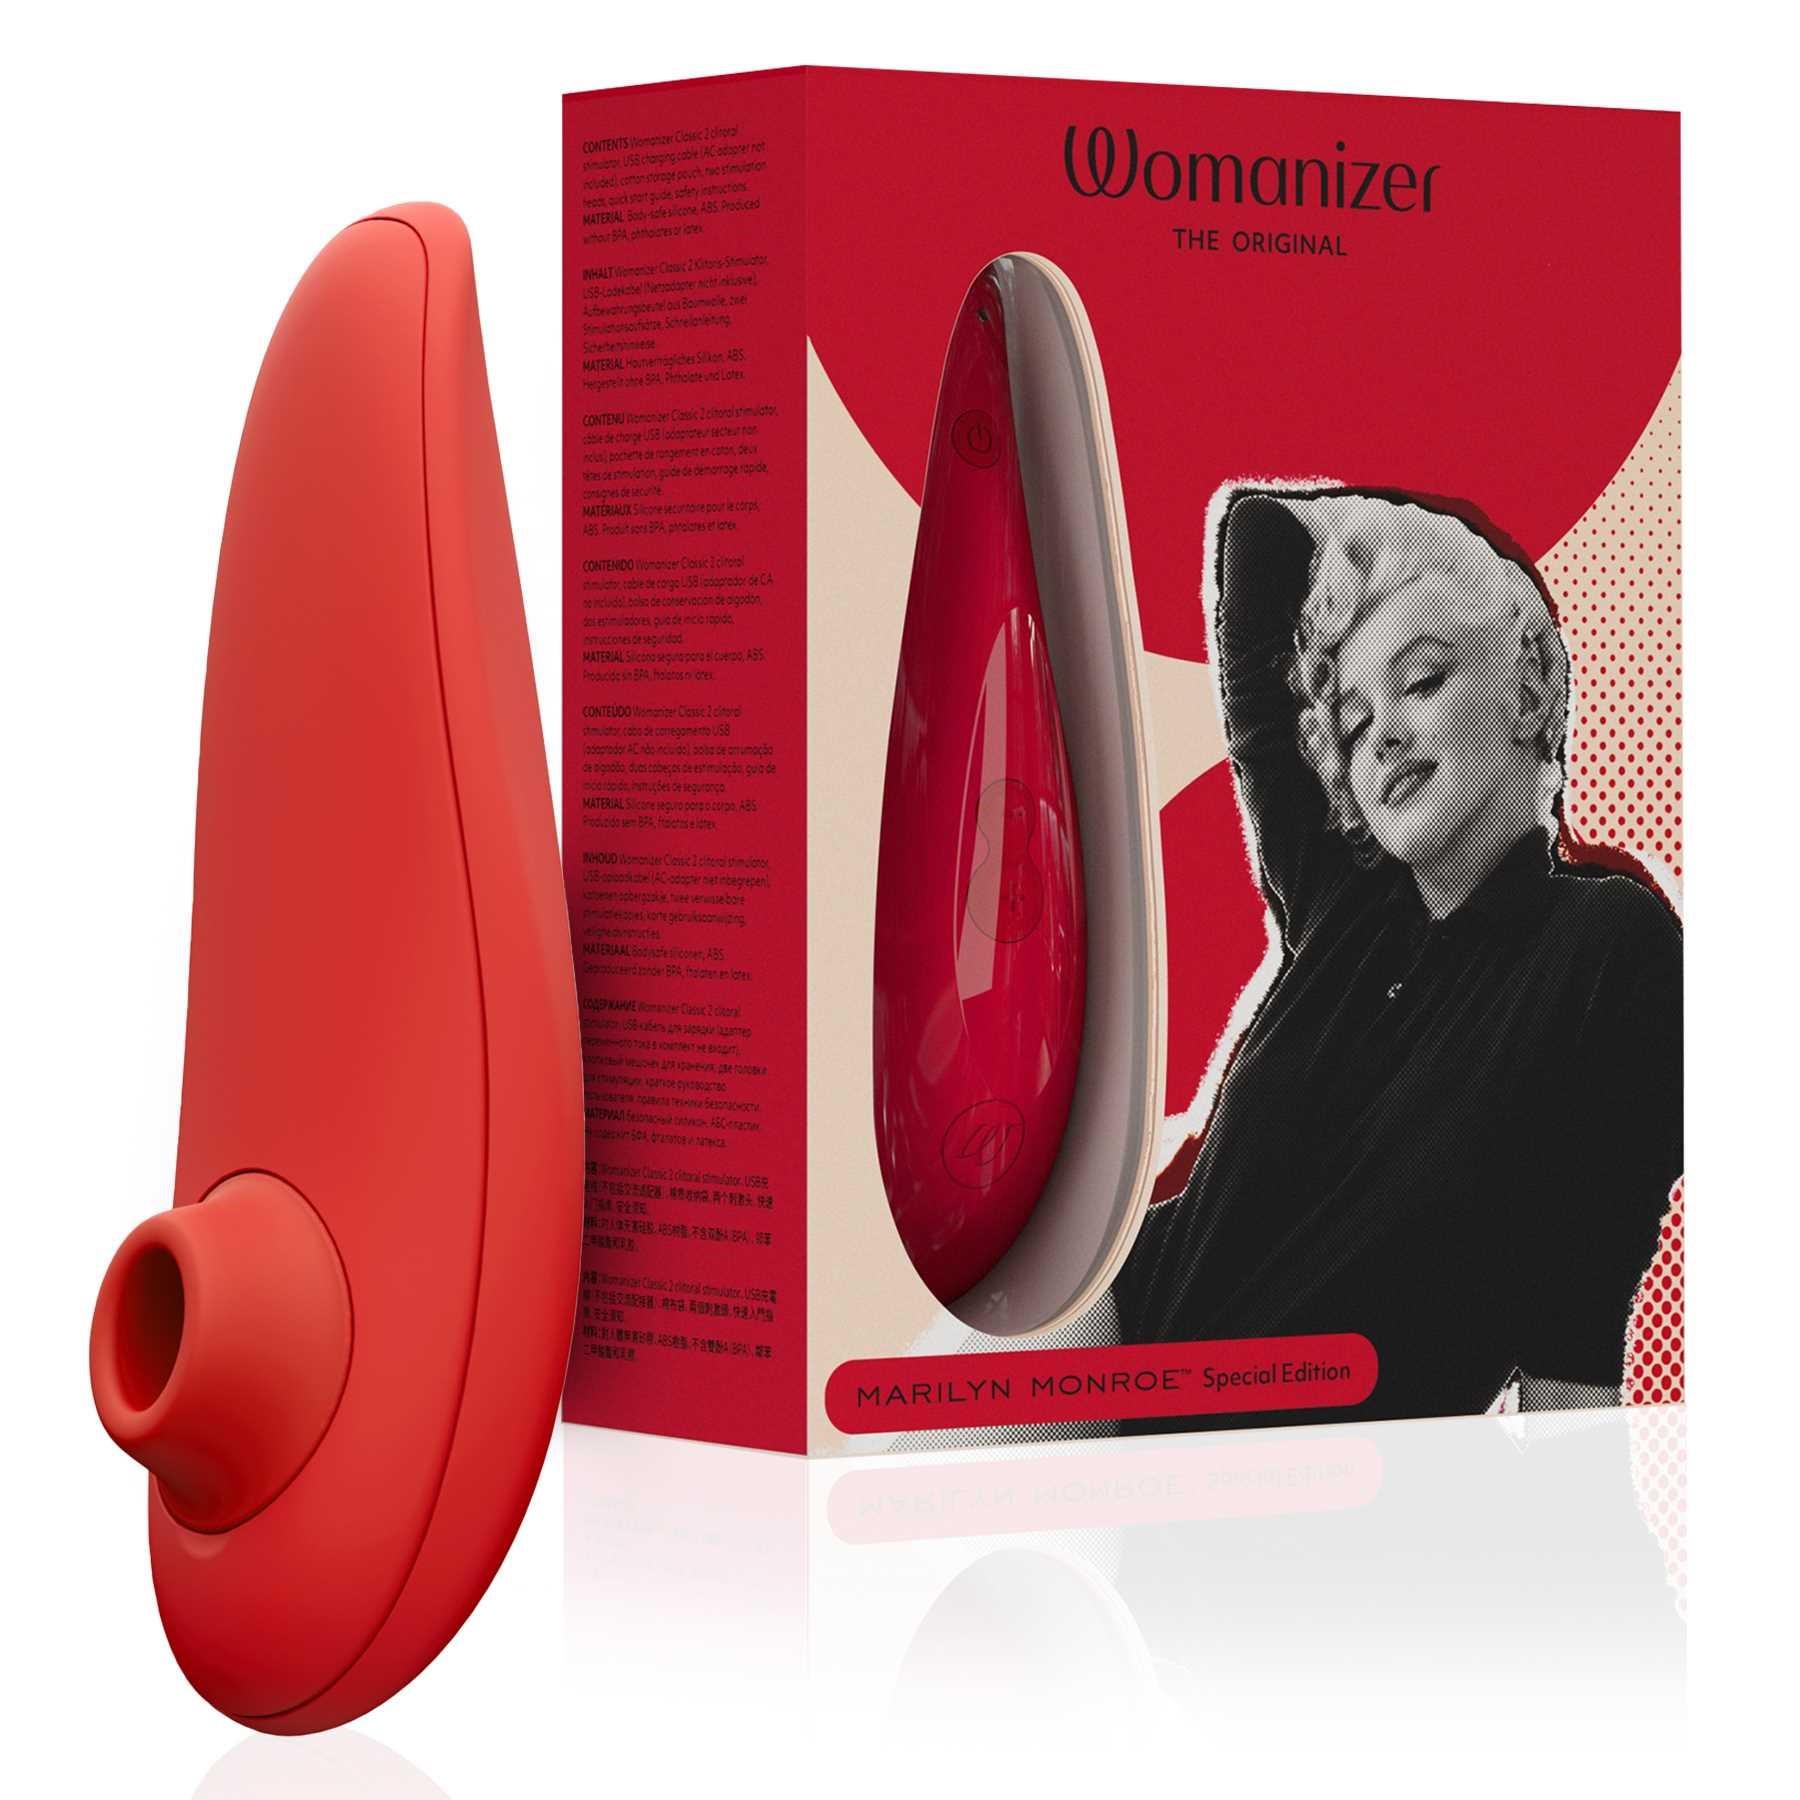 Womanizer Classic - Marilyn Monroe Edition - Product and Packaging